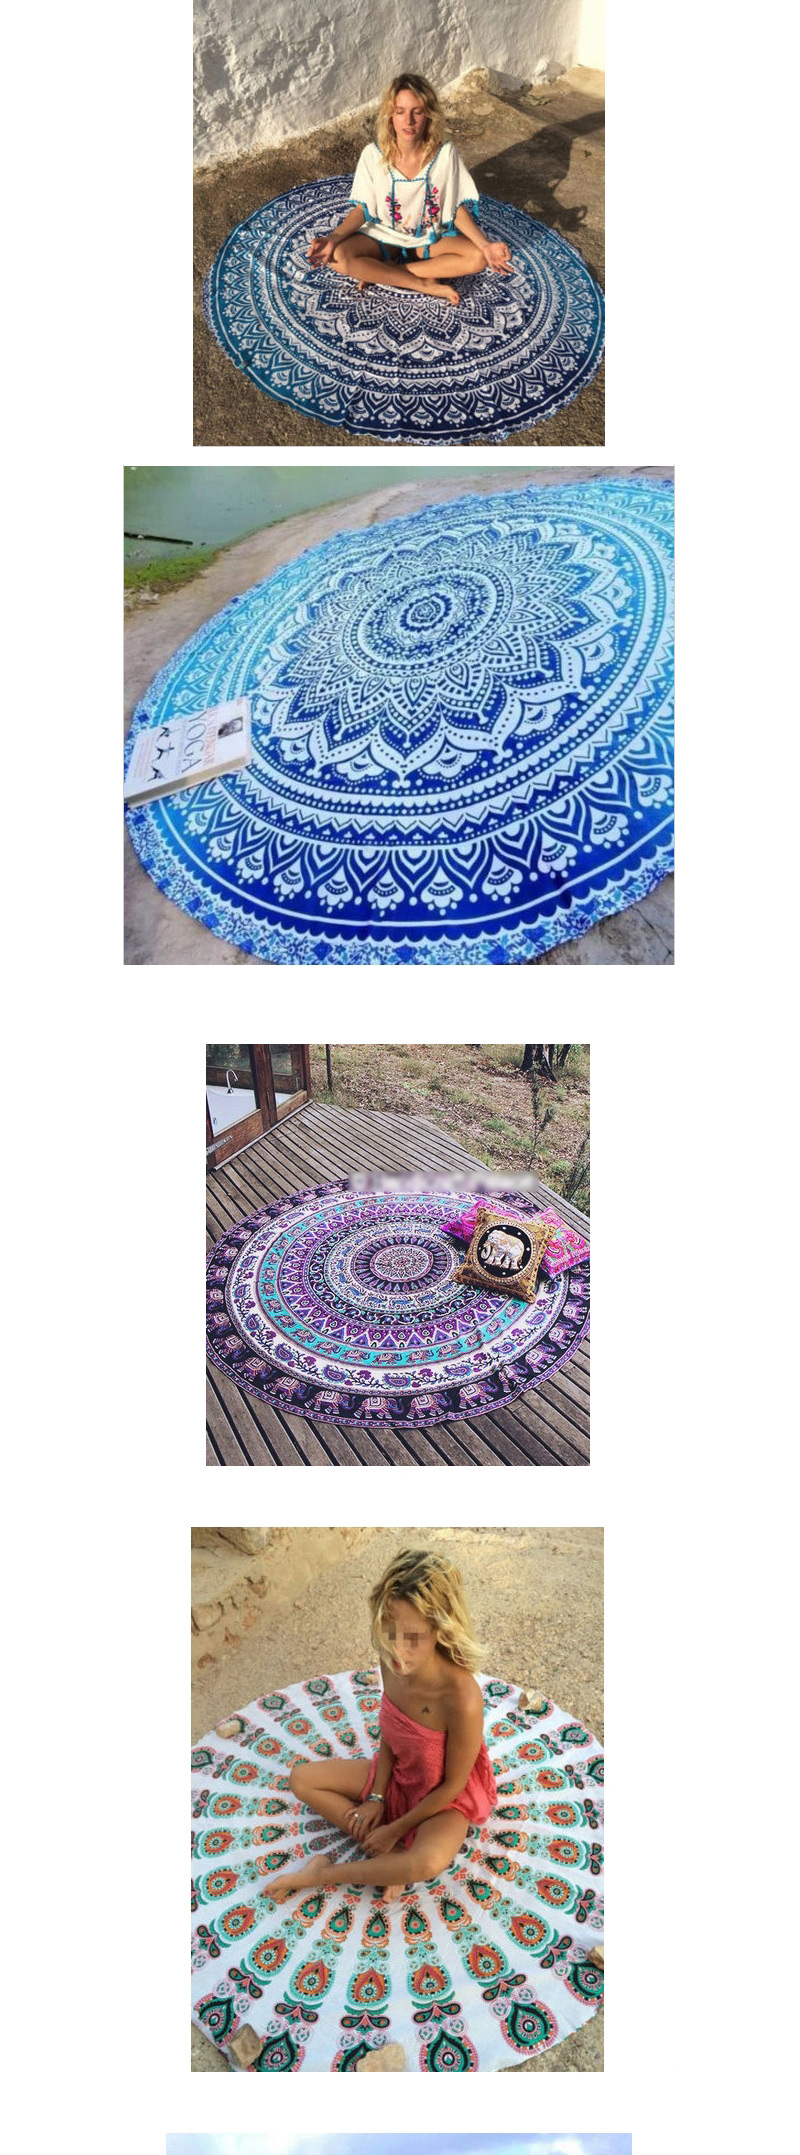 Fashion Gpurple+green Peacock Flower Pattern Decorated Round Shape Shawl,Cover-Ups